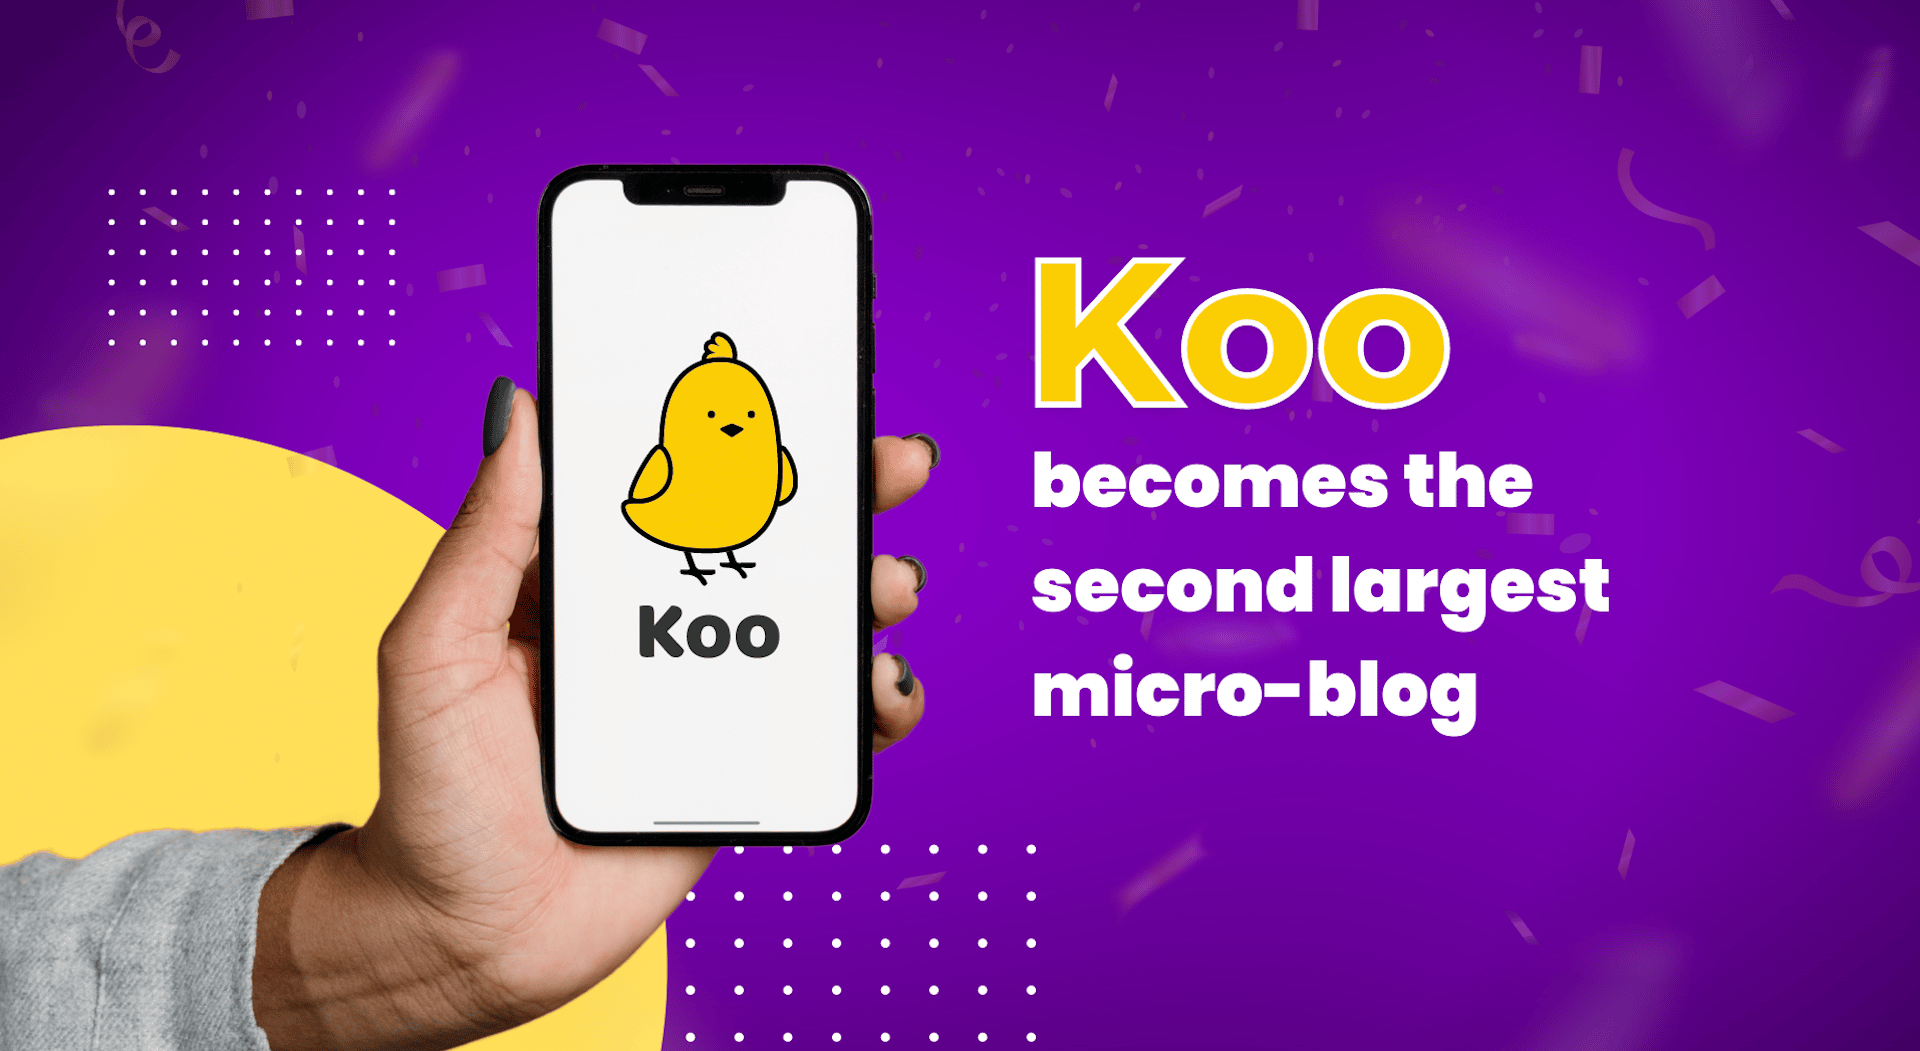 Koo becomes the second largest micro-blog available to the world